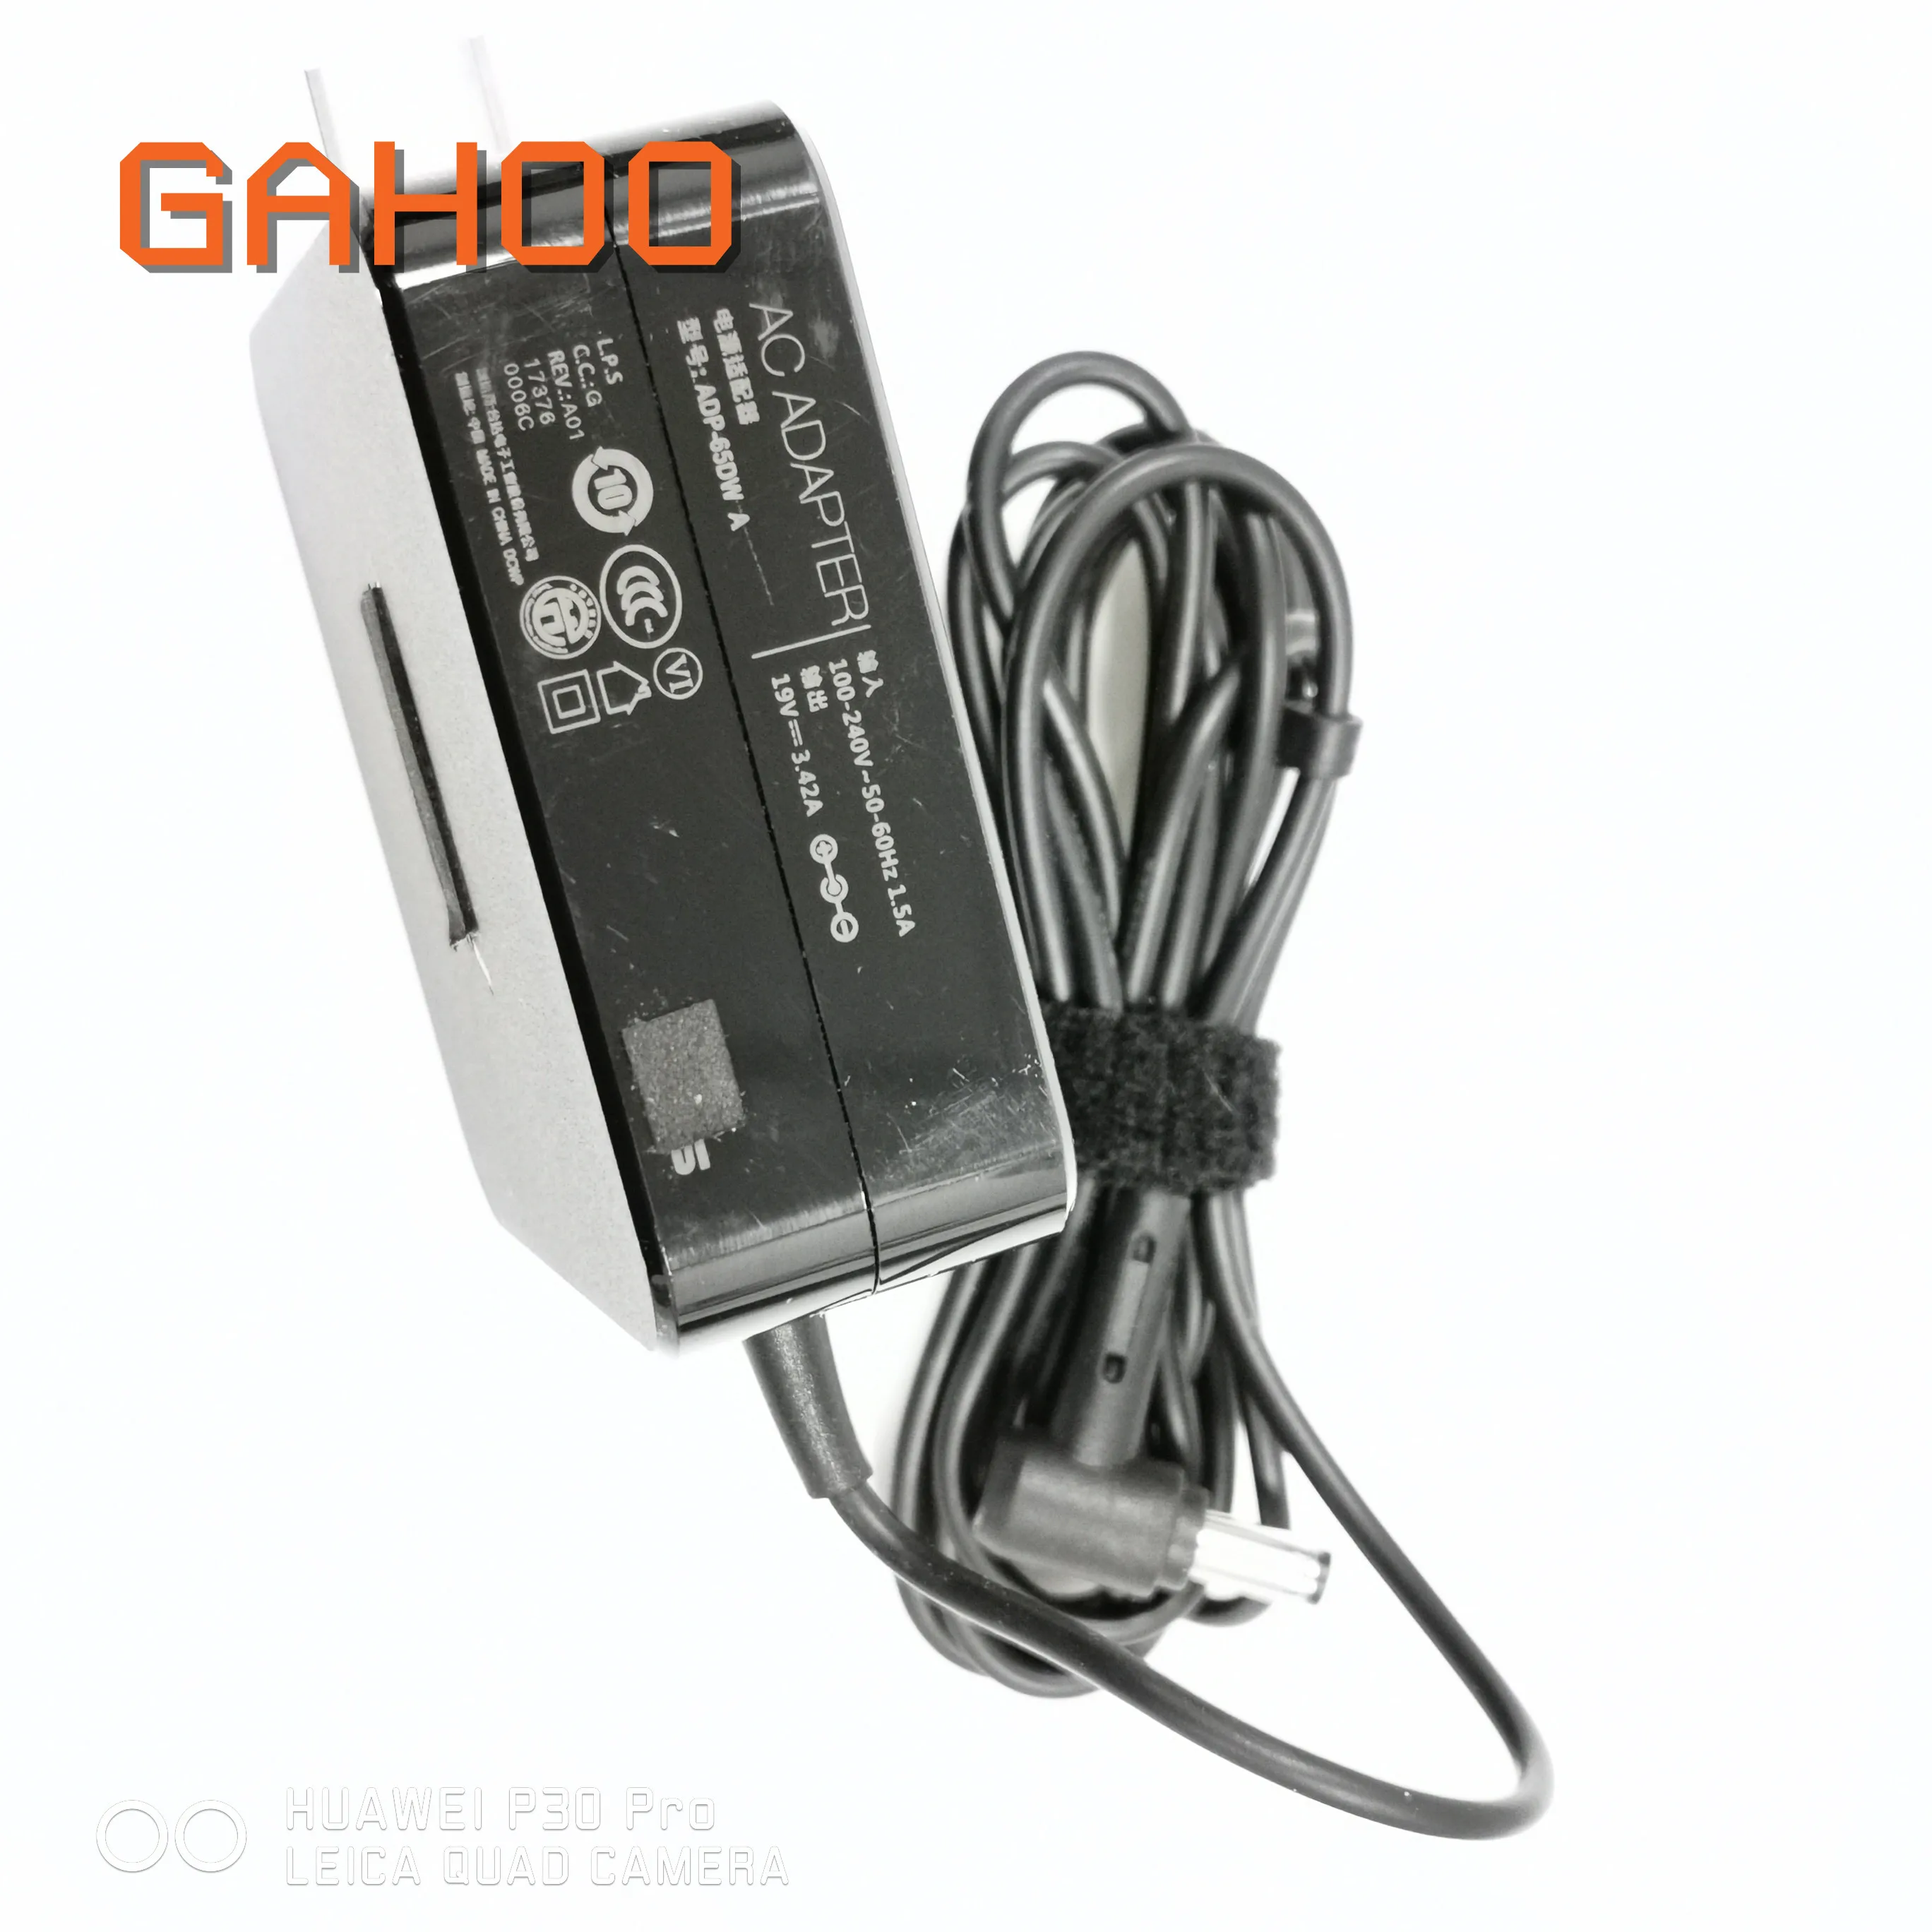 

Laptop US Adapter 19V 3.42A 65W 4.0*1.35mm ADP-65DW A AC Power Charger for Asus UX21 UX31A UX32A UX301 U38N UX42VS UX50 UX52VS